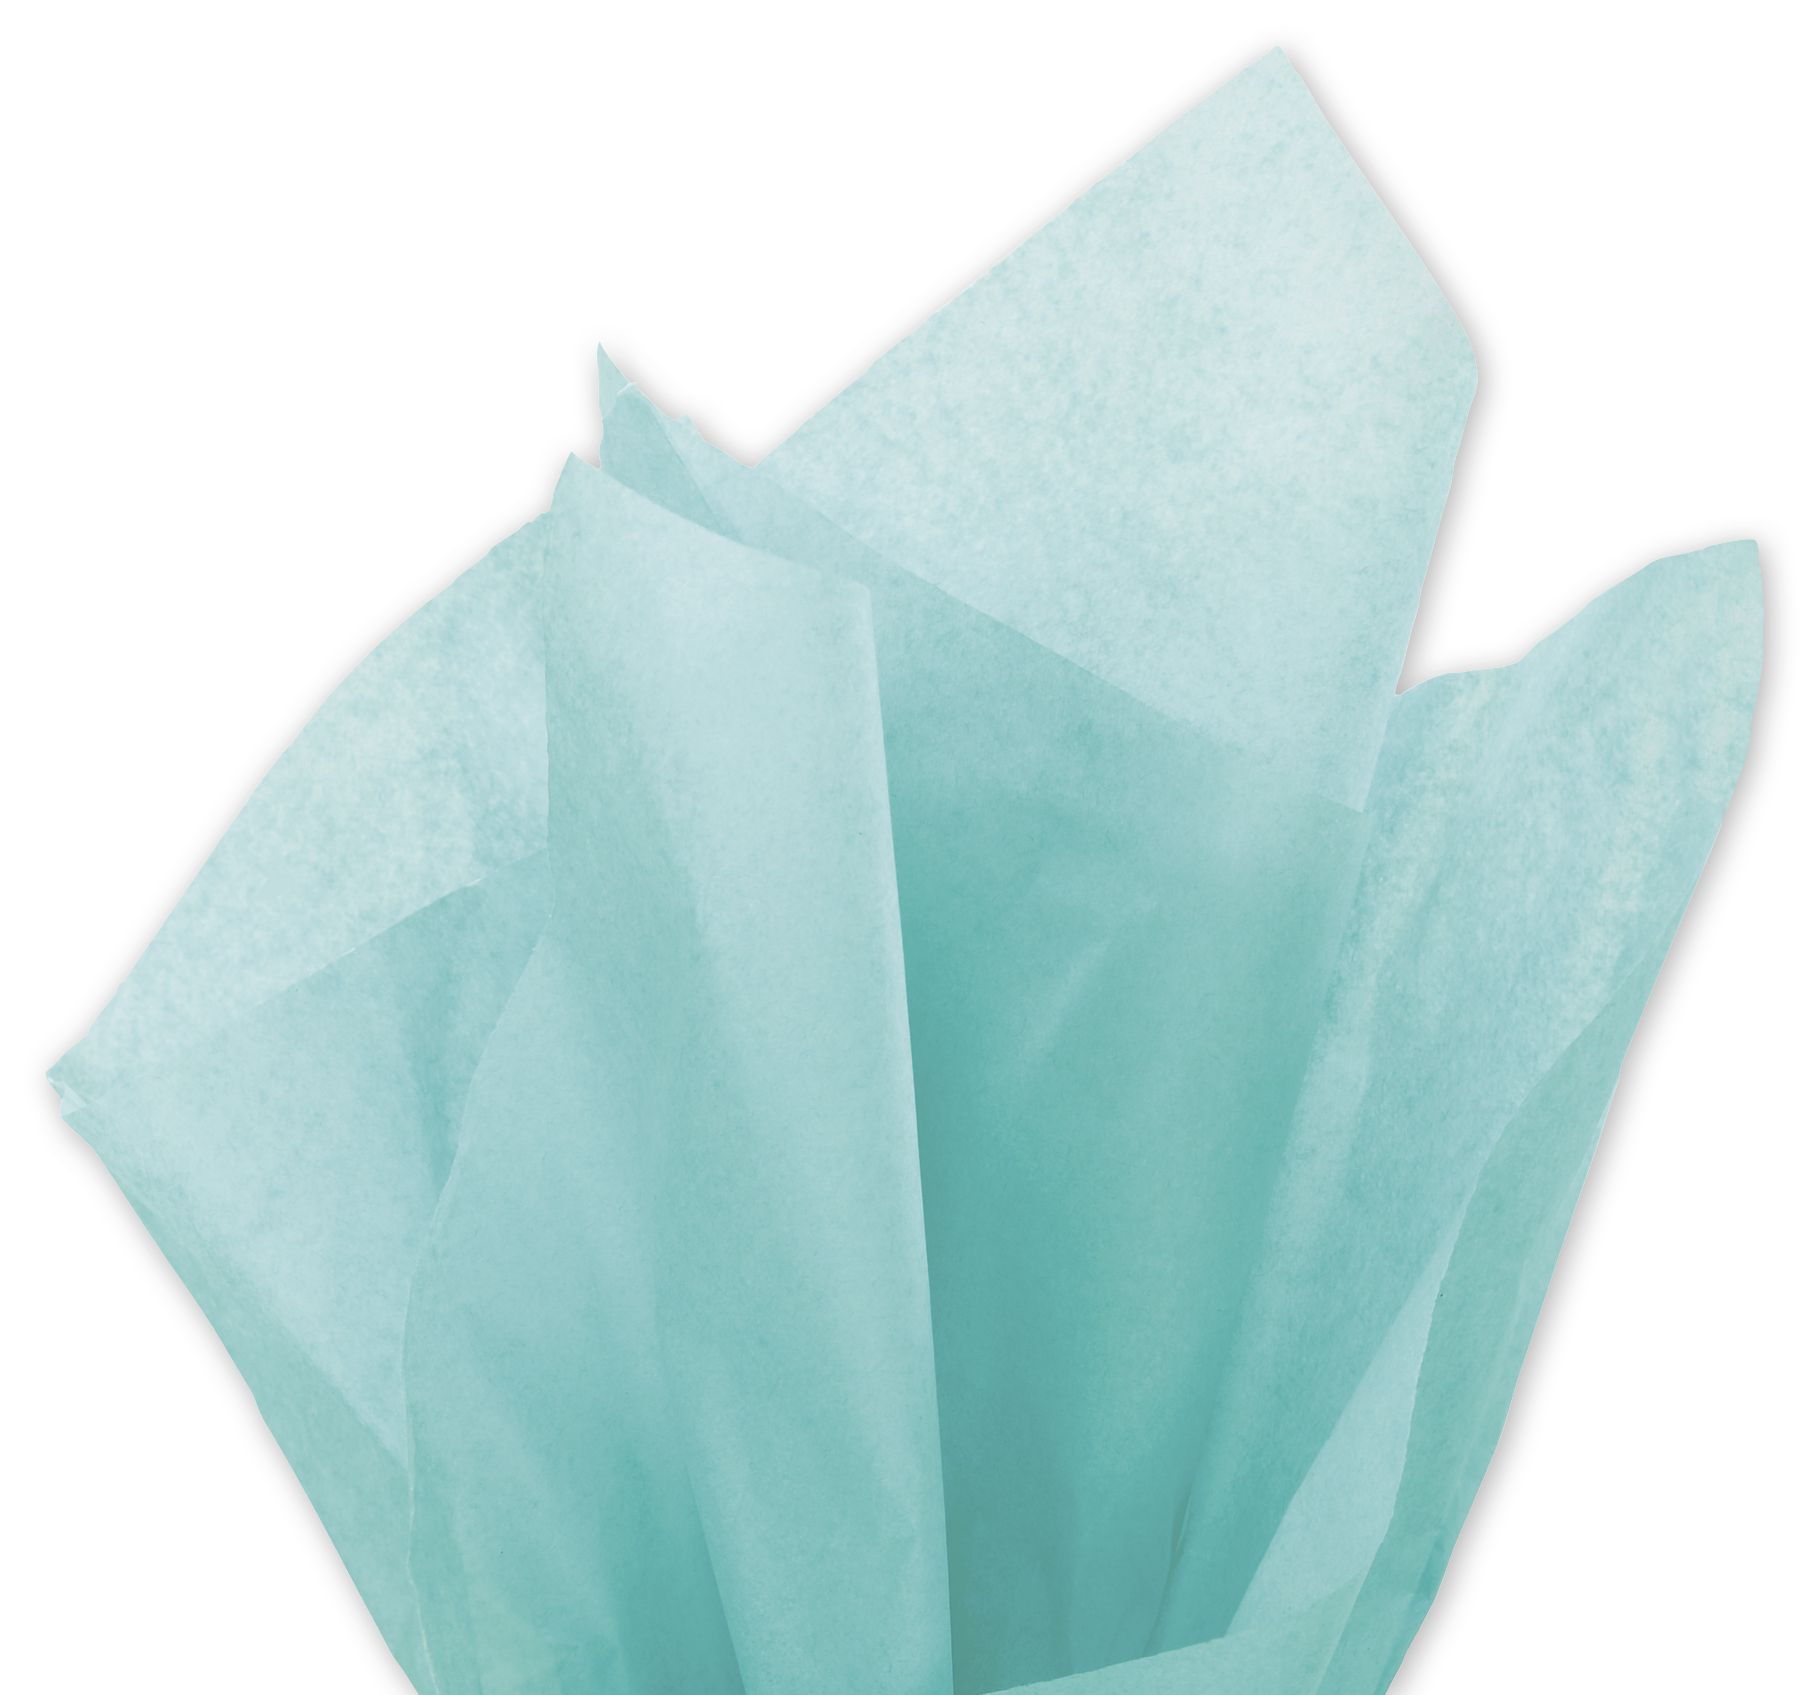 Dress up your gifts with this vibrant solid aquamarine tissue paper. Mix and match with colors or patterns for added style.